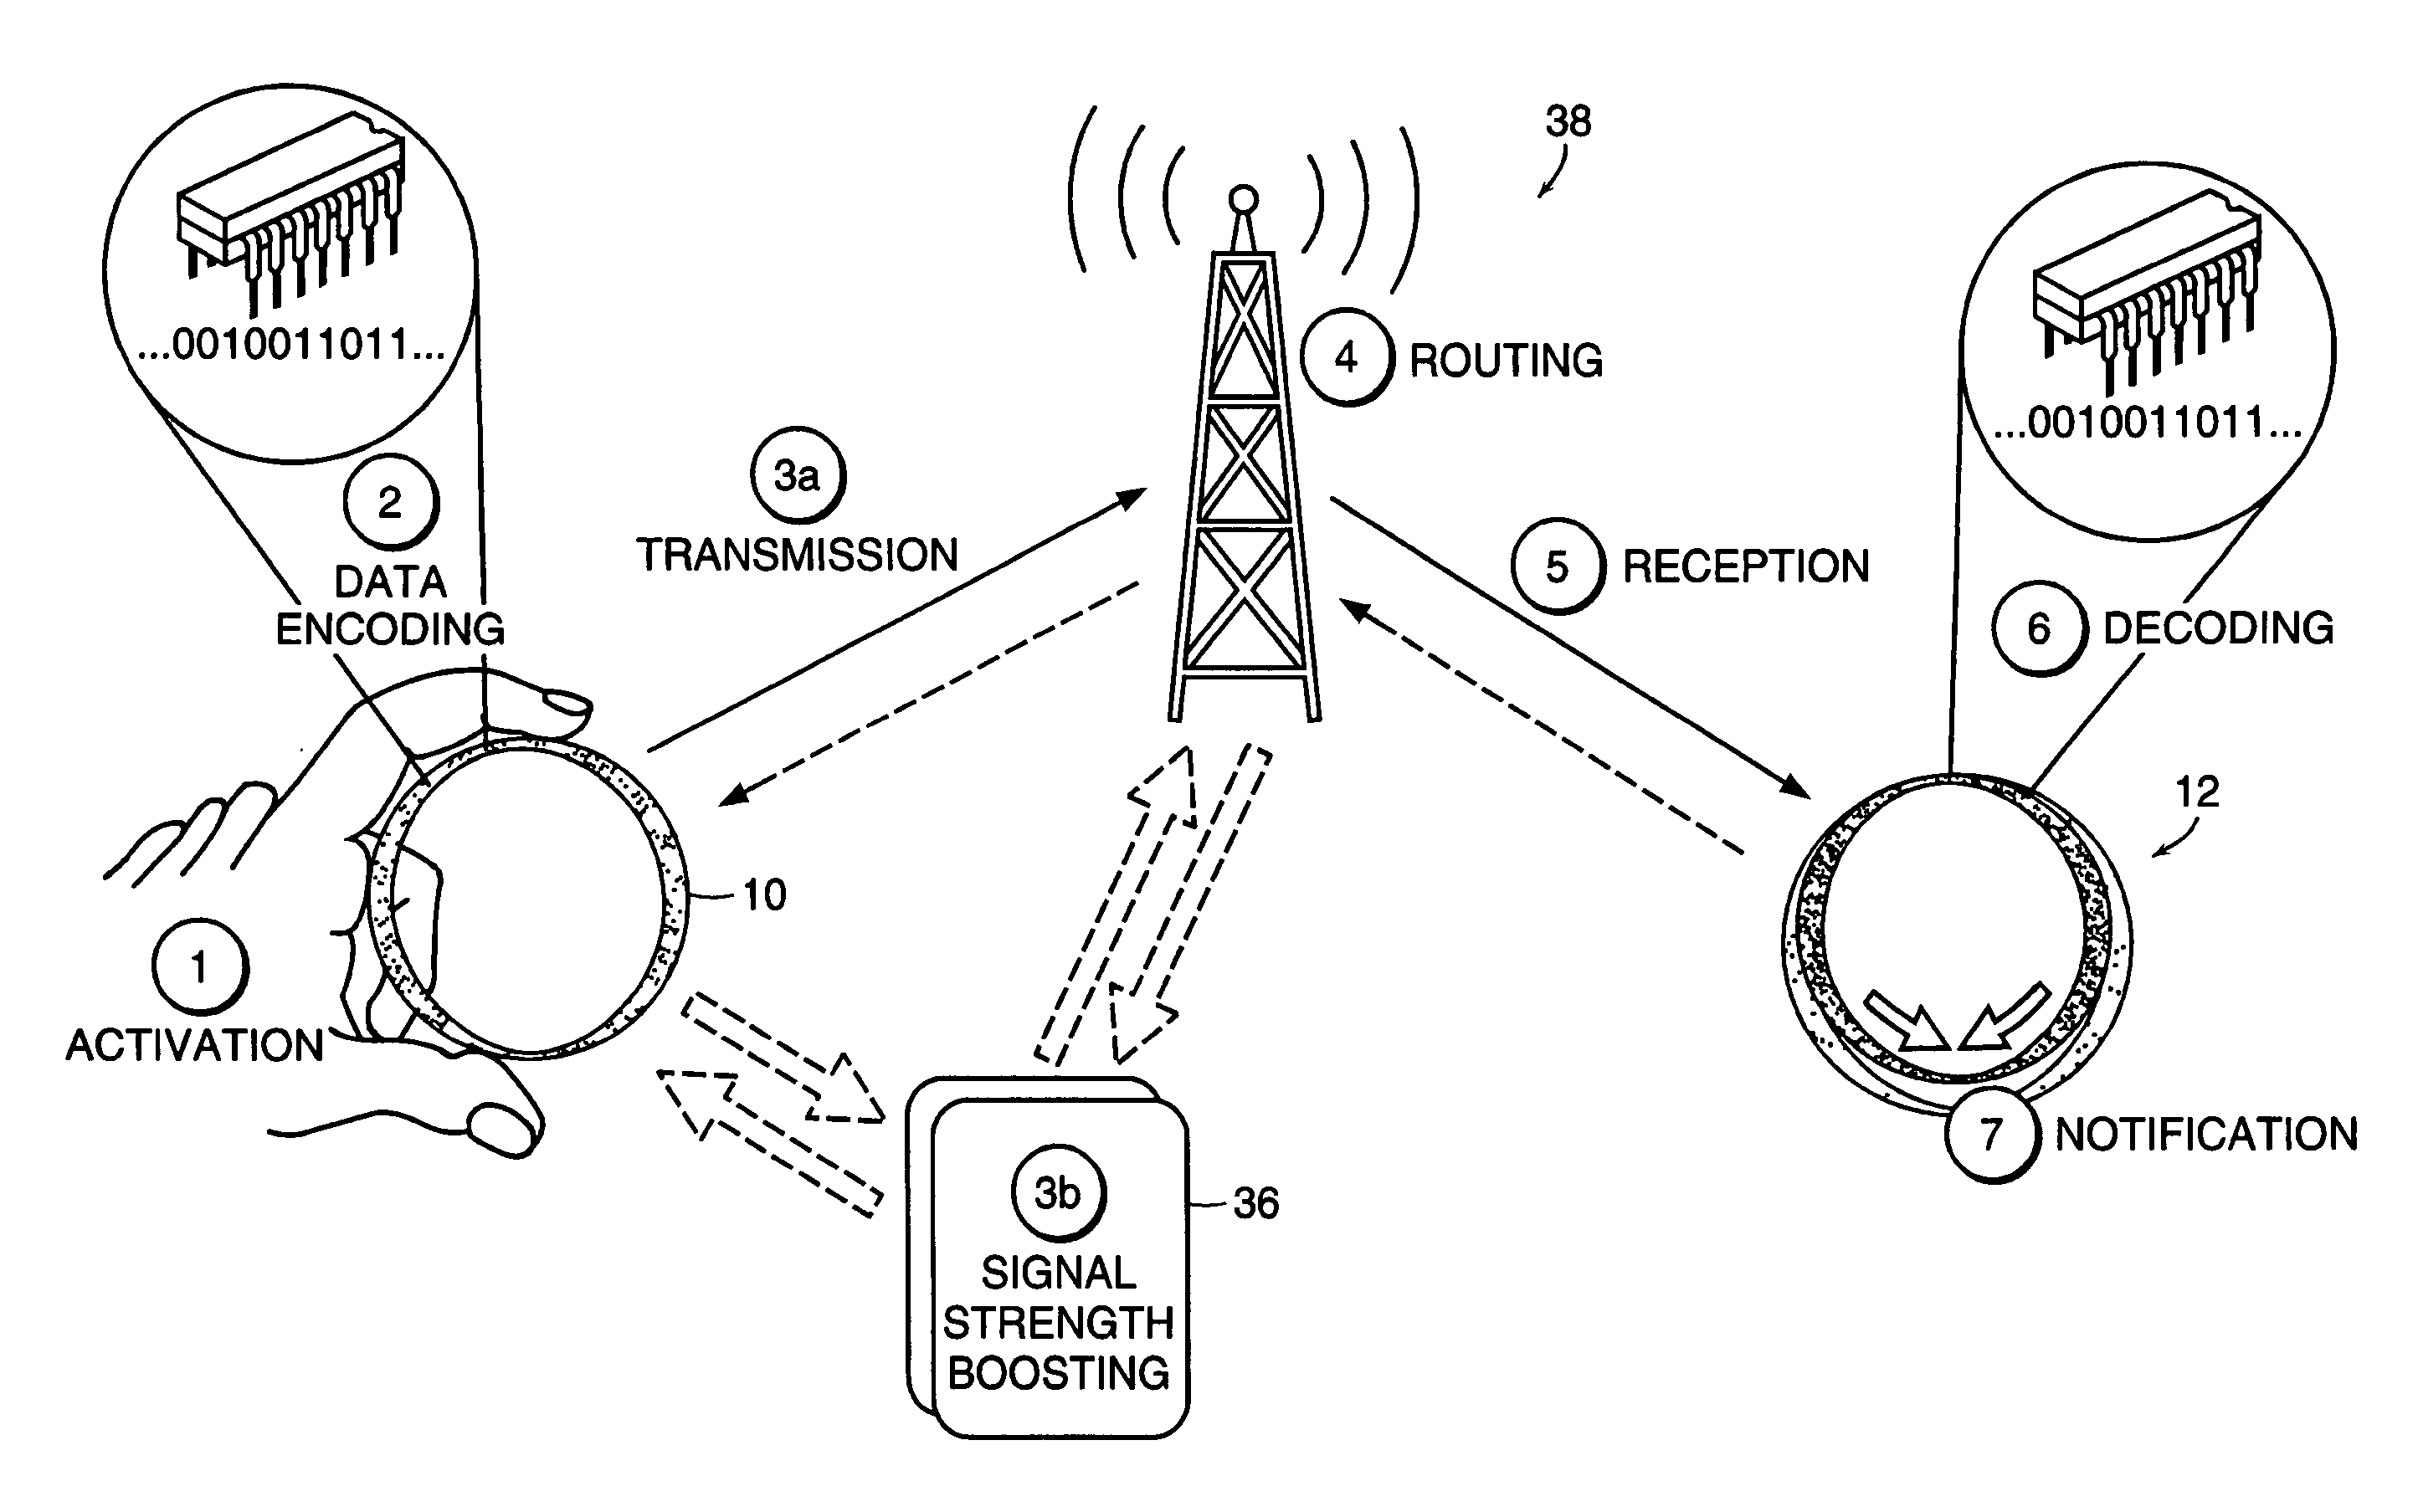 State adaption devices and methods for wireless communications